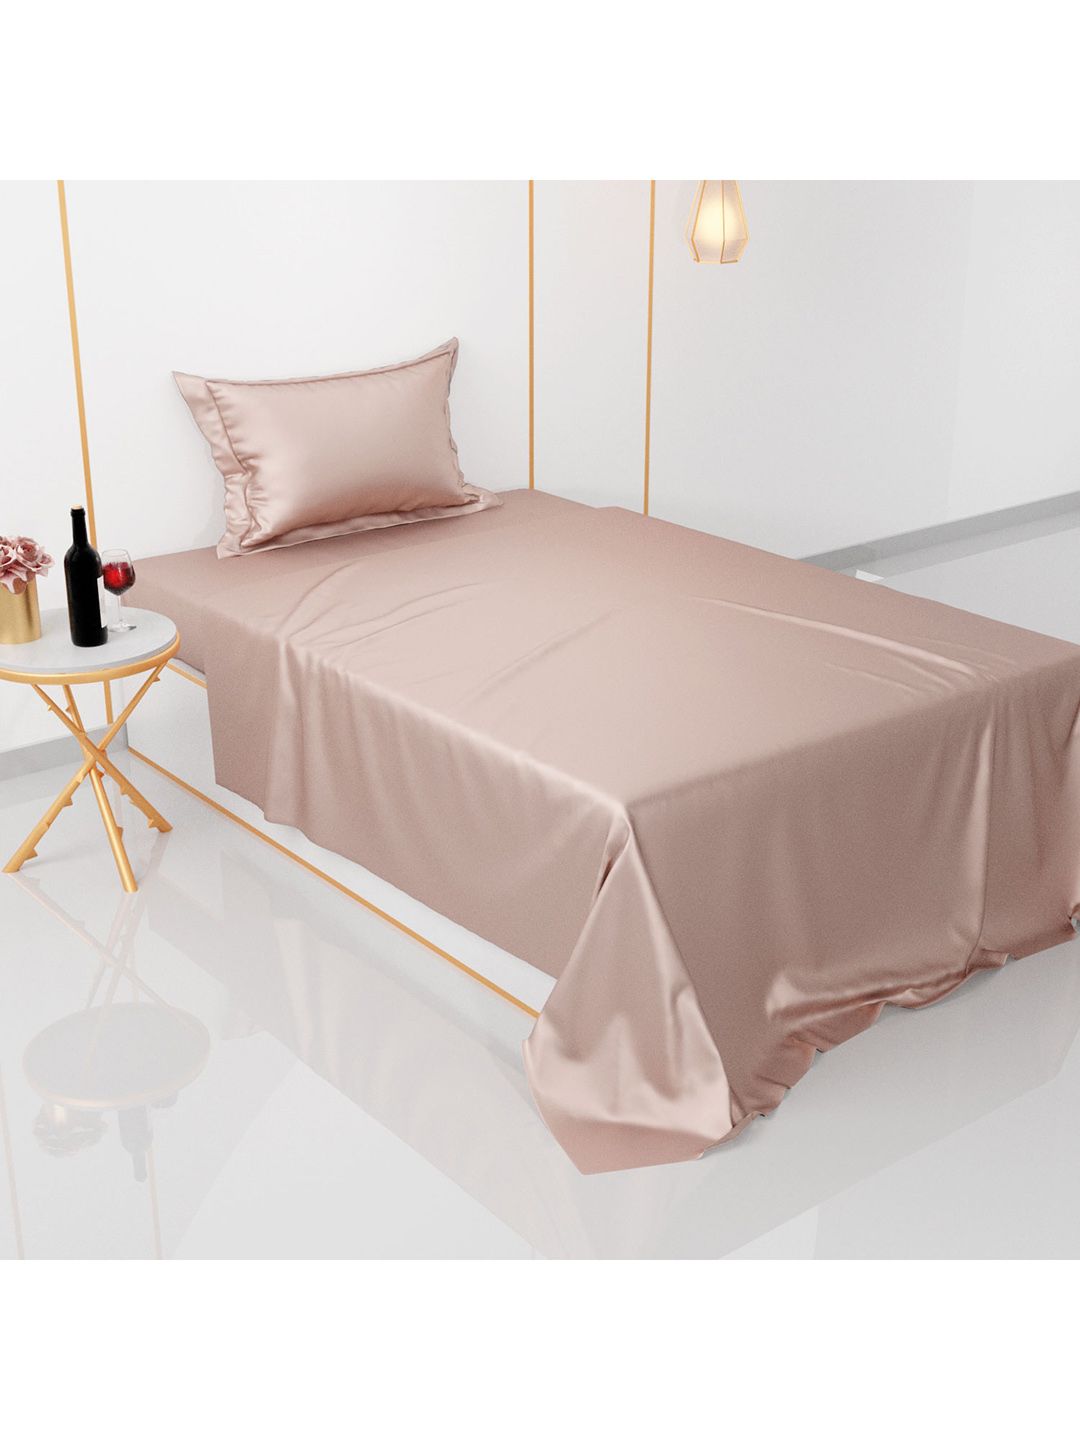 Stoa Paris Gold-Toned & Gold-Toned Single Bedsheet with 1 Pillow Covers Price in India